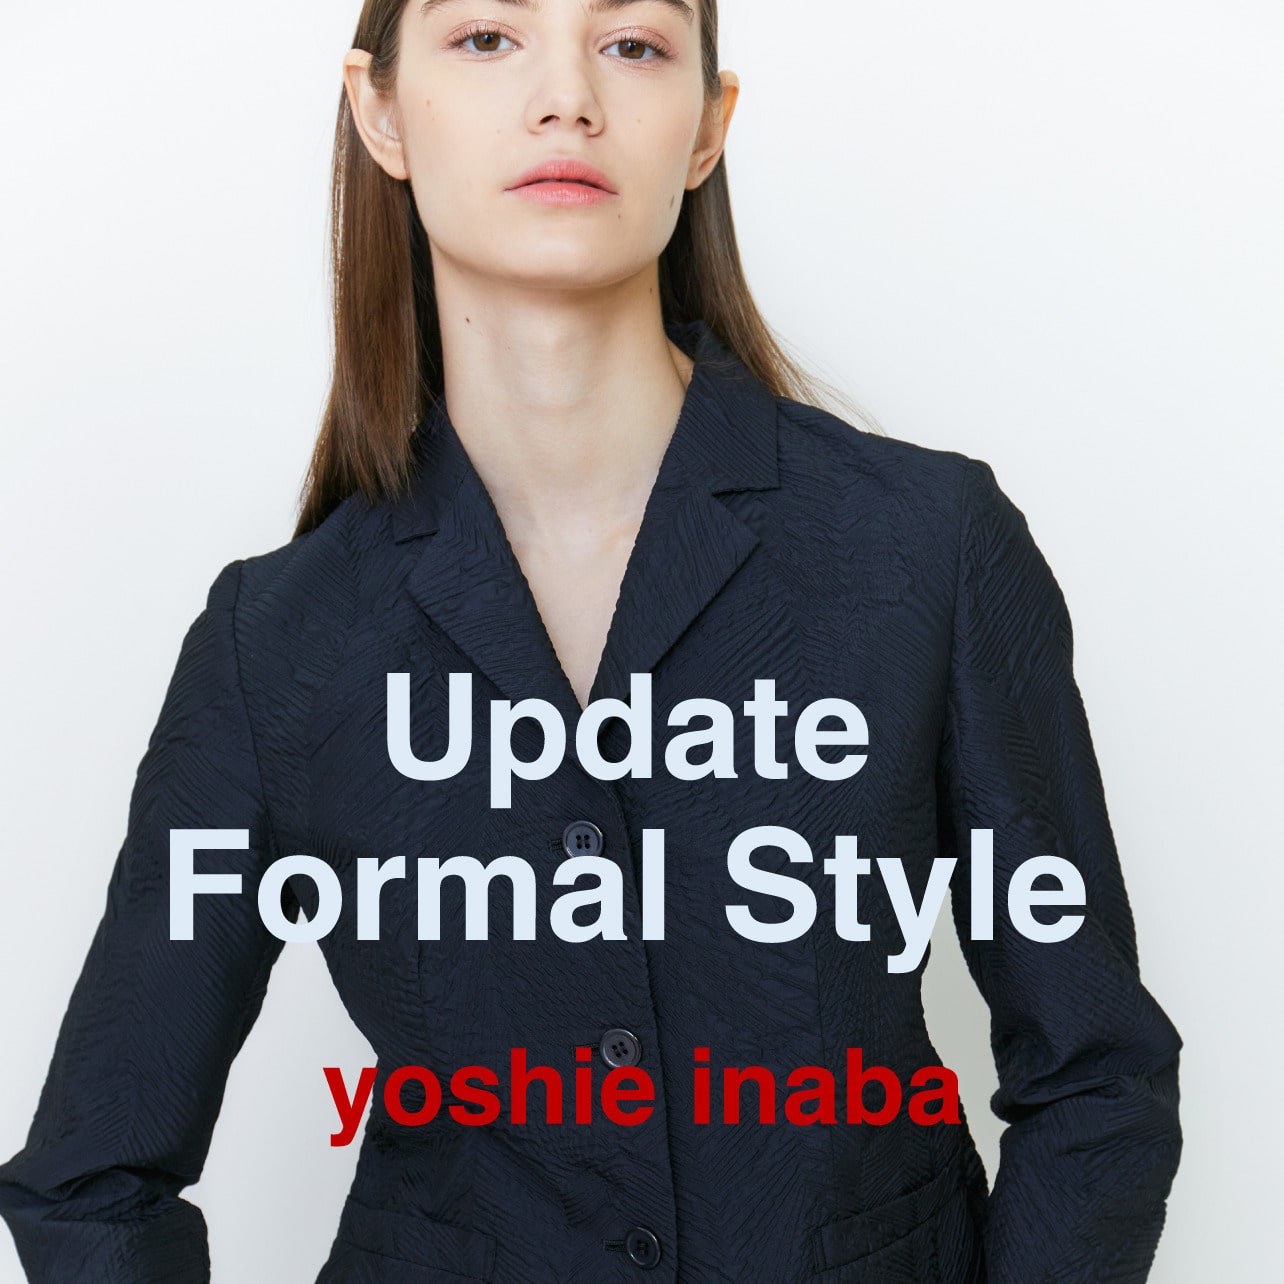 Update!! Formal Style